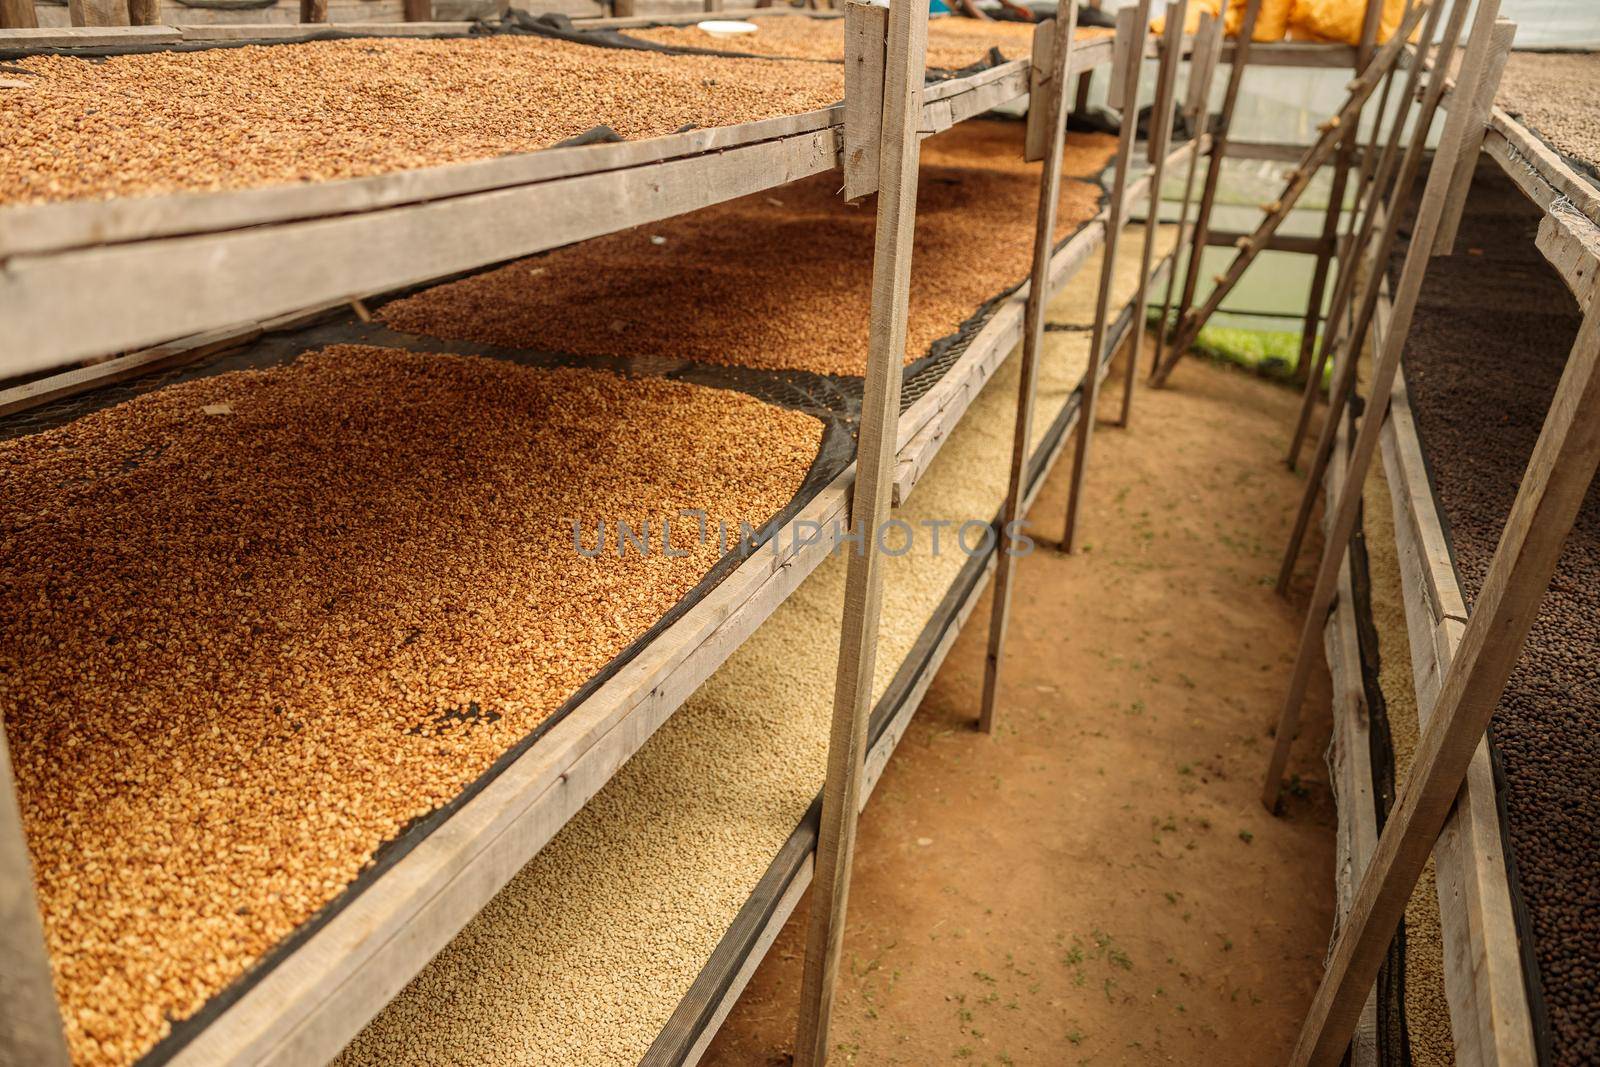 Many drying racks with coffee beans at farm in Africa by Yaroslav_astakhov